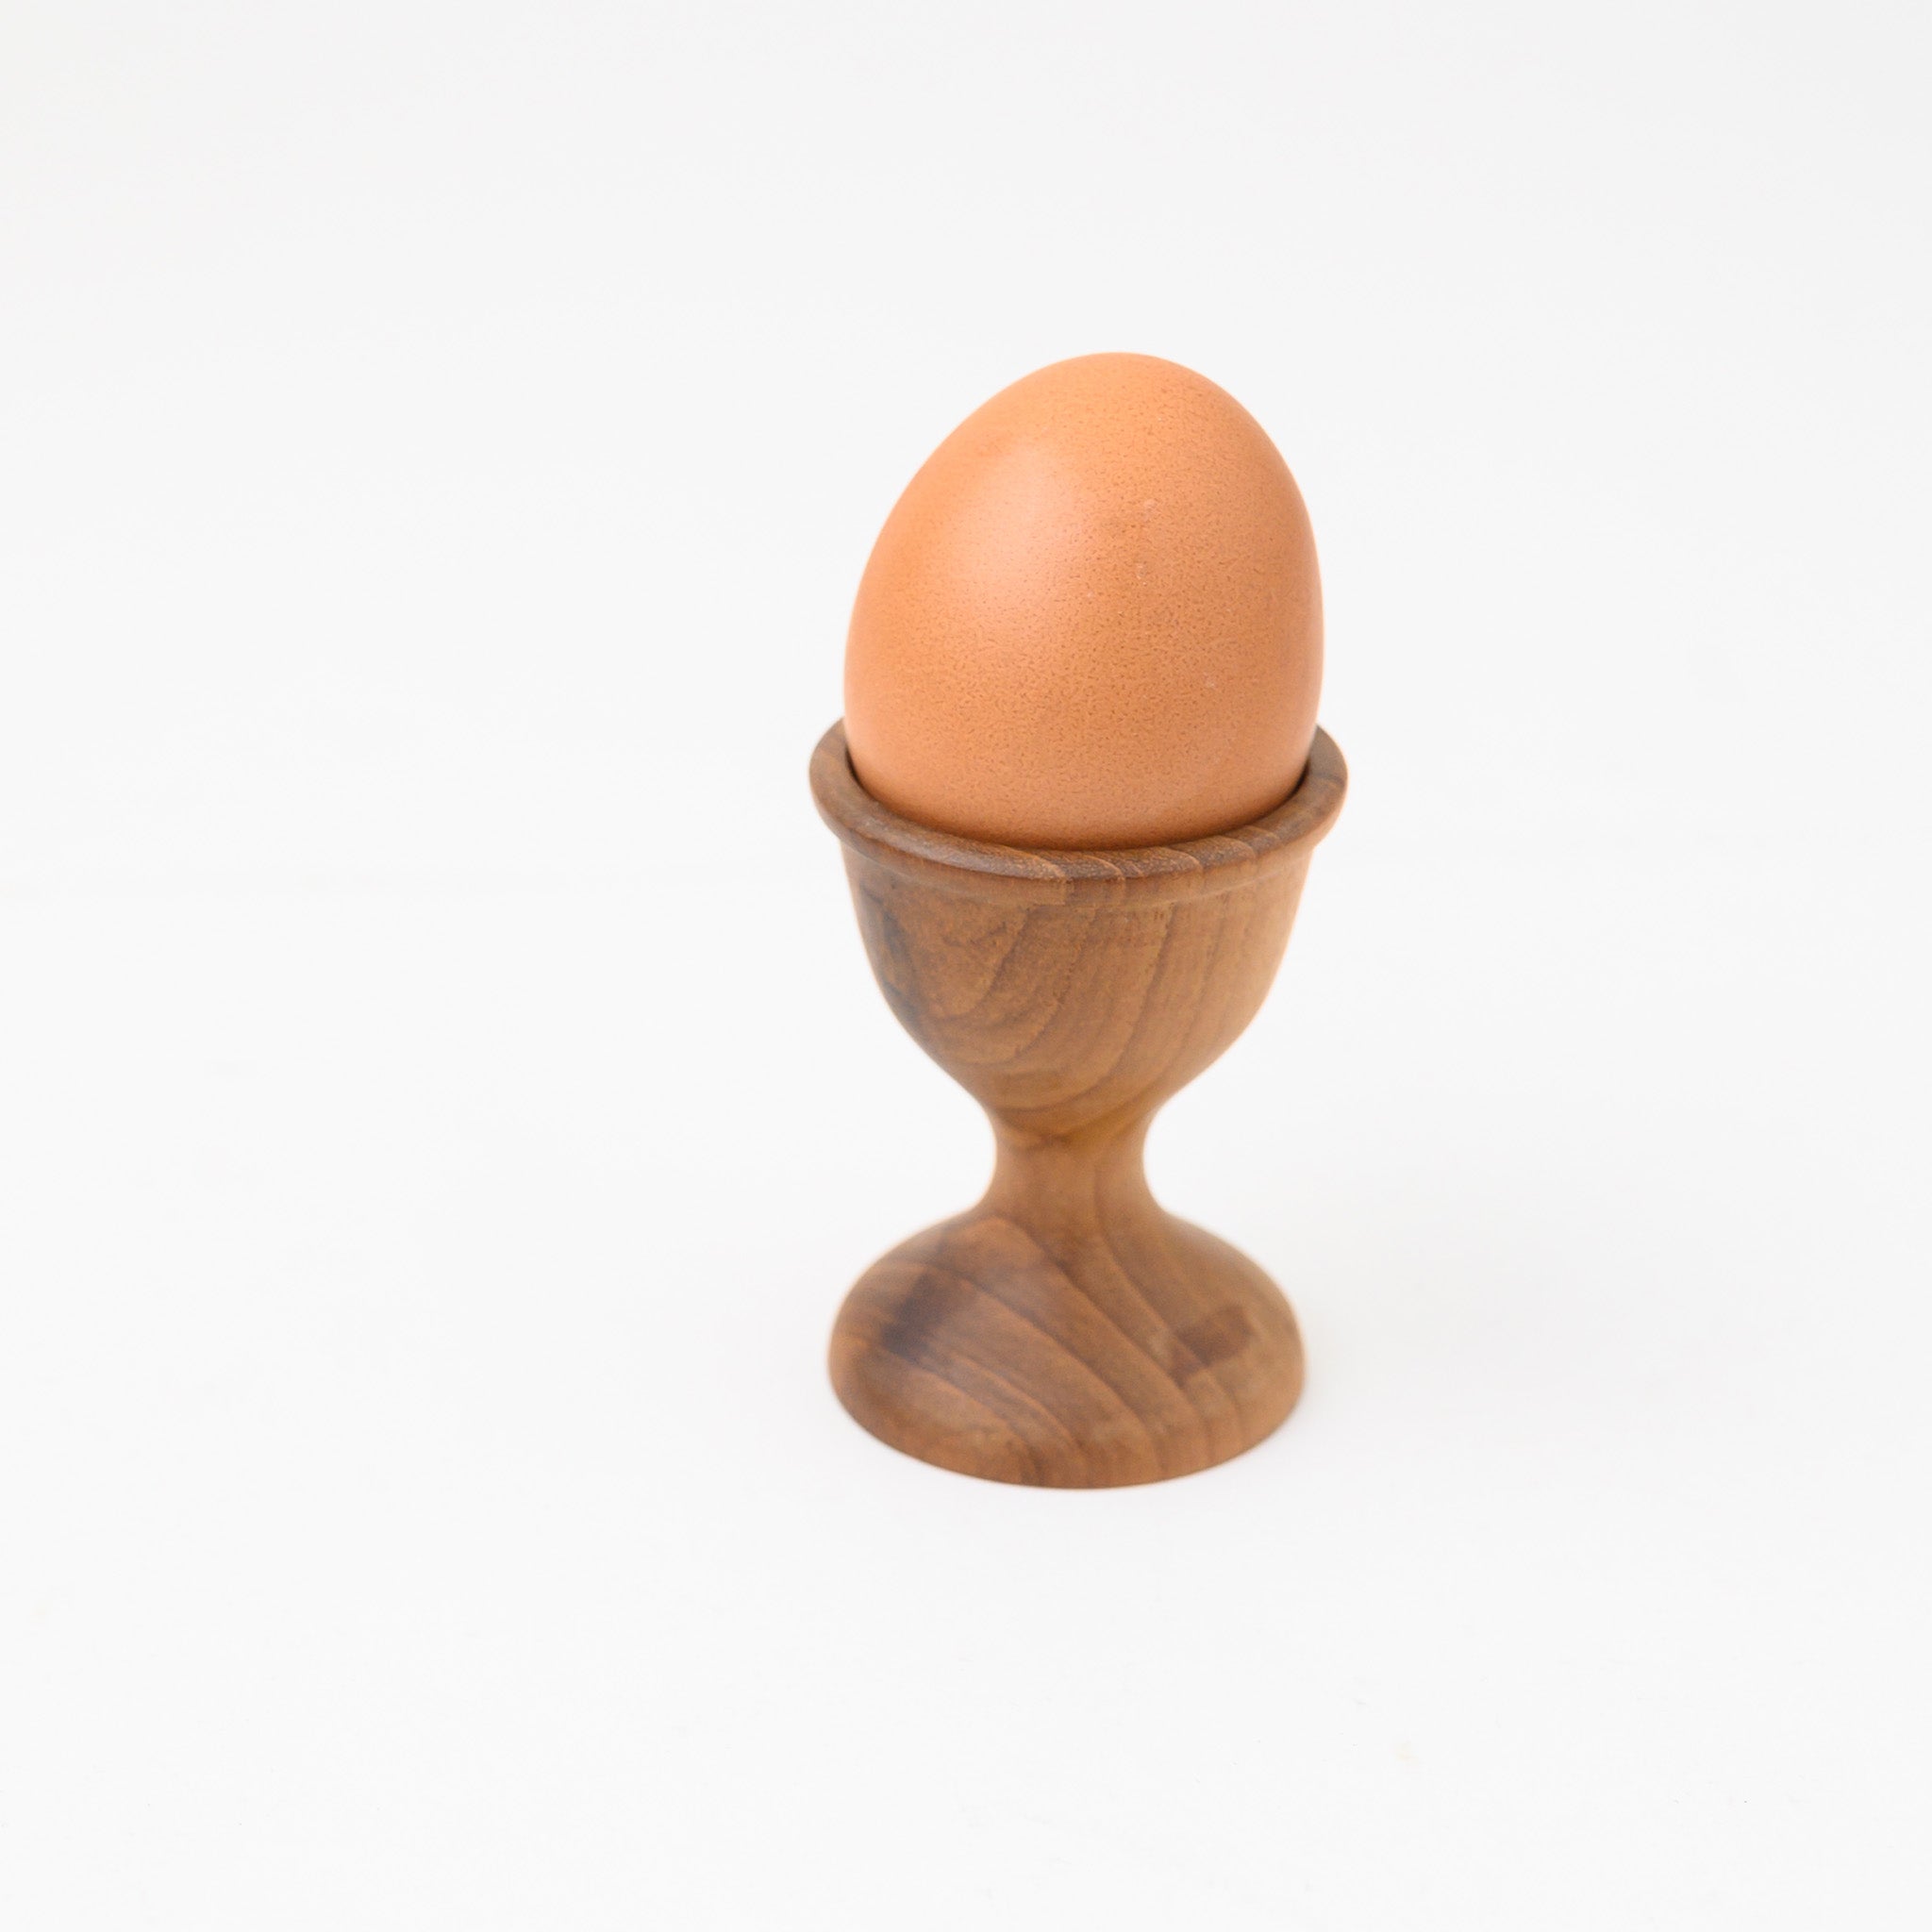 EGG CUP